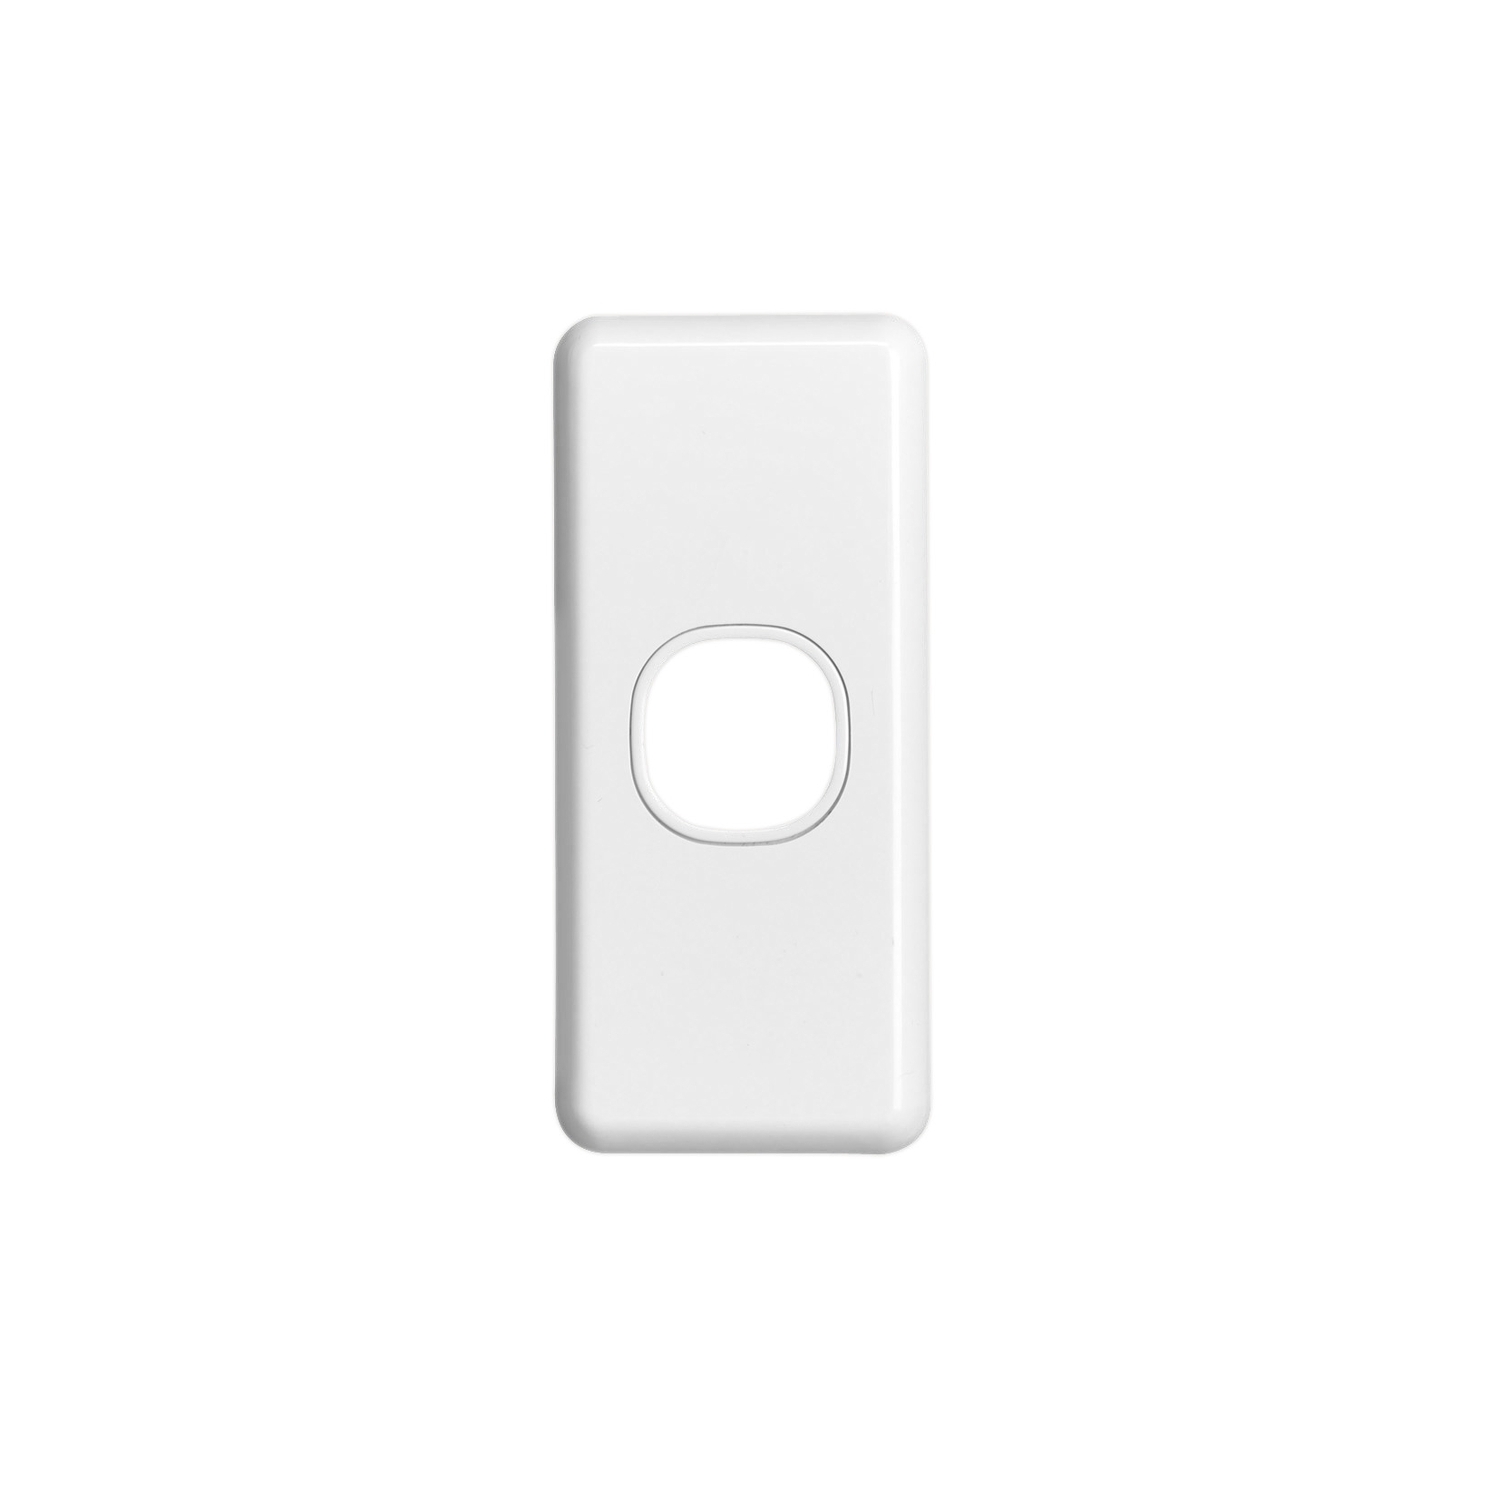 Switch Grid Plates and Covers, Architrave Switch, 1 Gang